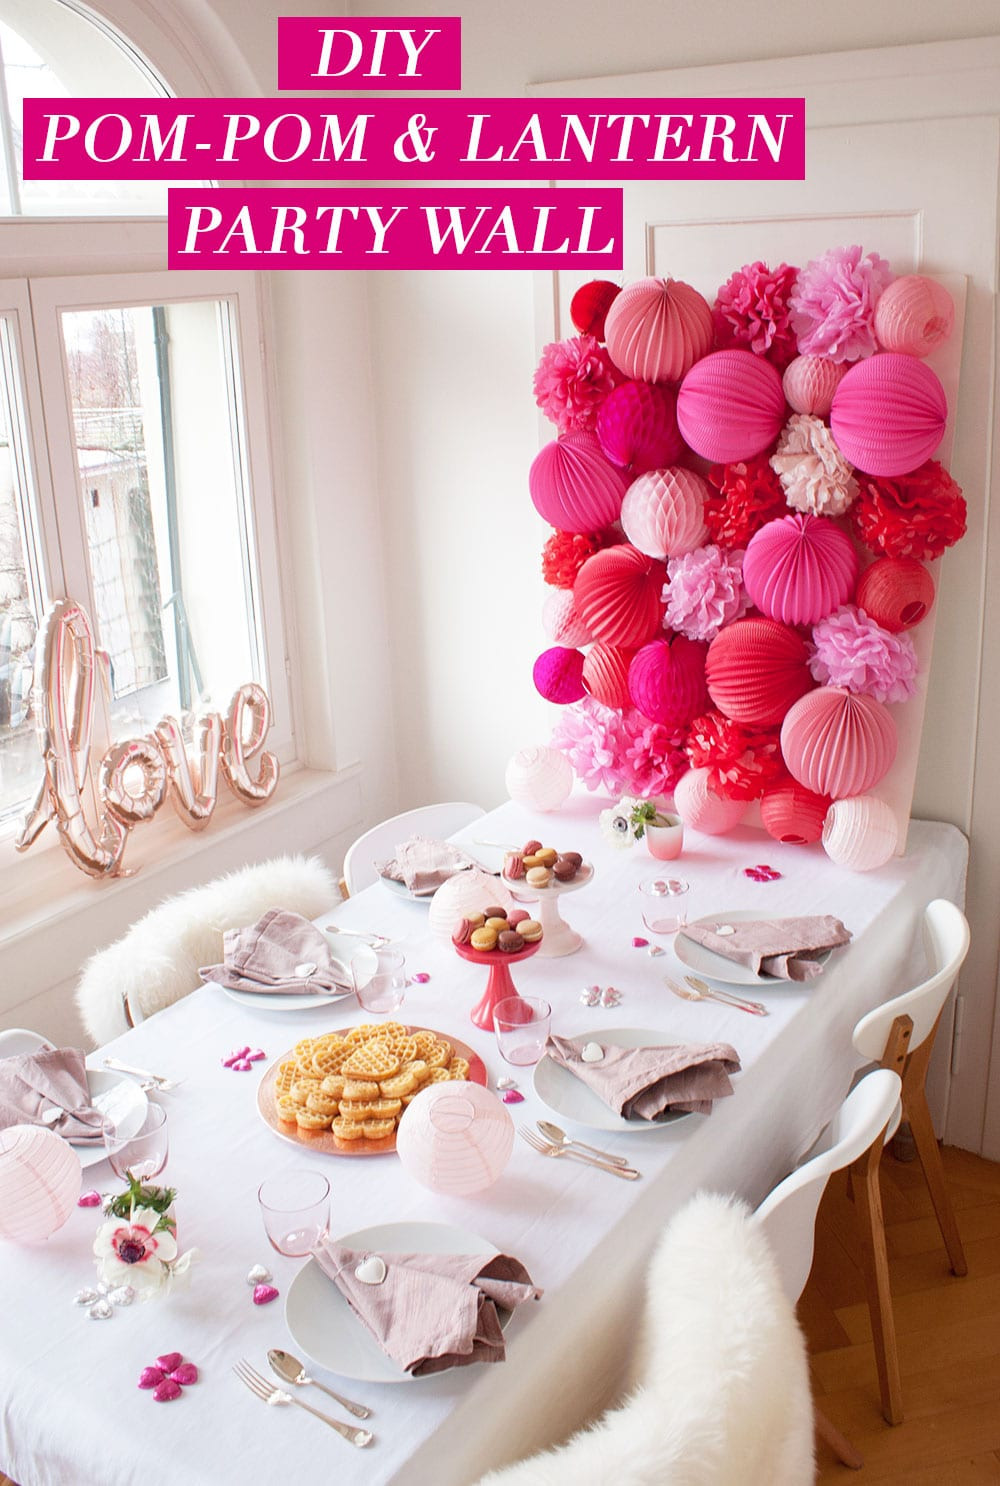 DIY Party Decorations
 DIY Pink and Red Valentine s Party Wall